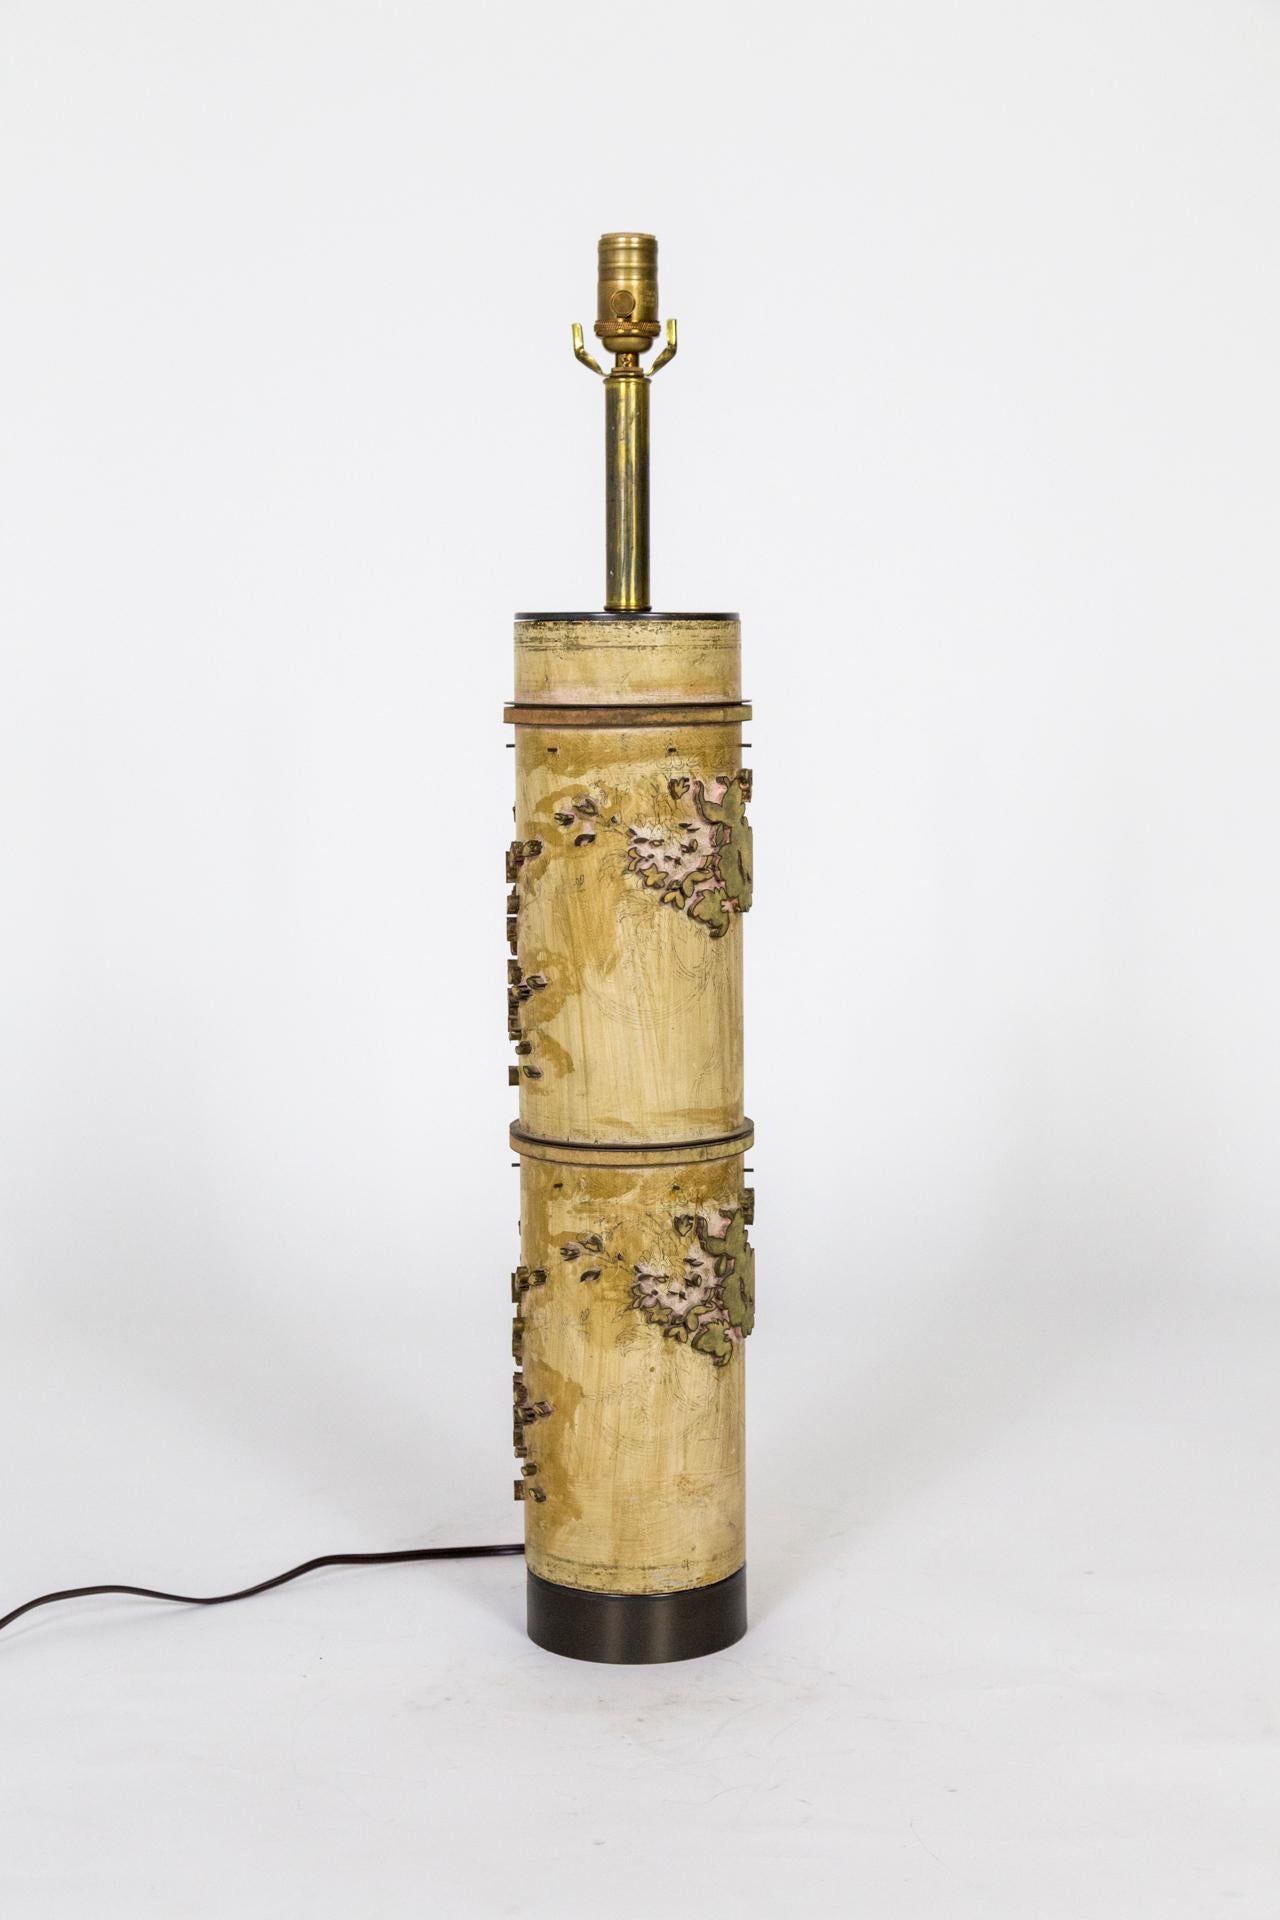 A lamp made from a vintage roller for printing wallpaper. uniquely detailed flower designs with interesting markings from the printing process. Newly made into a table lamp with complimentary patinated brass hardware and dimmer on the socket.